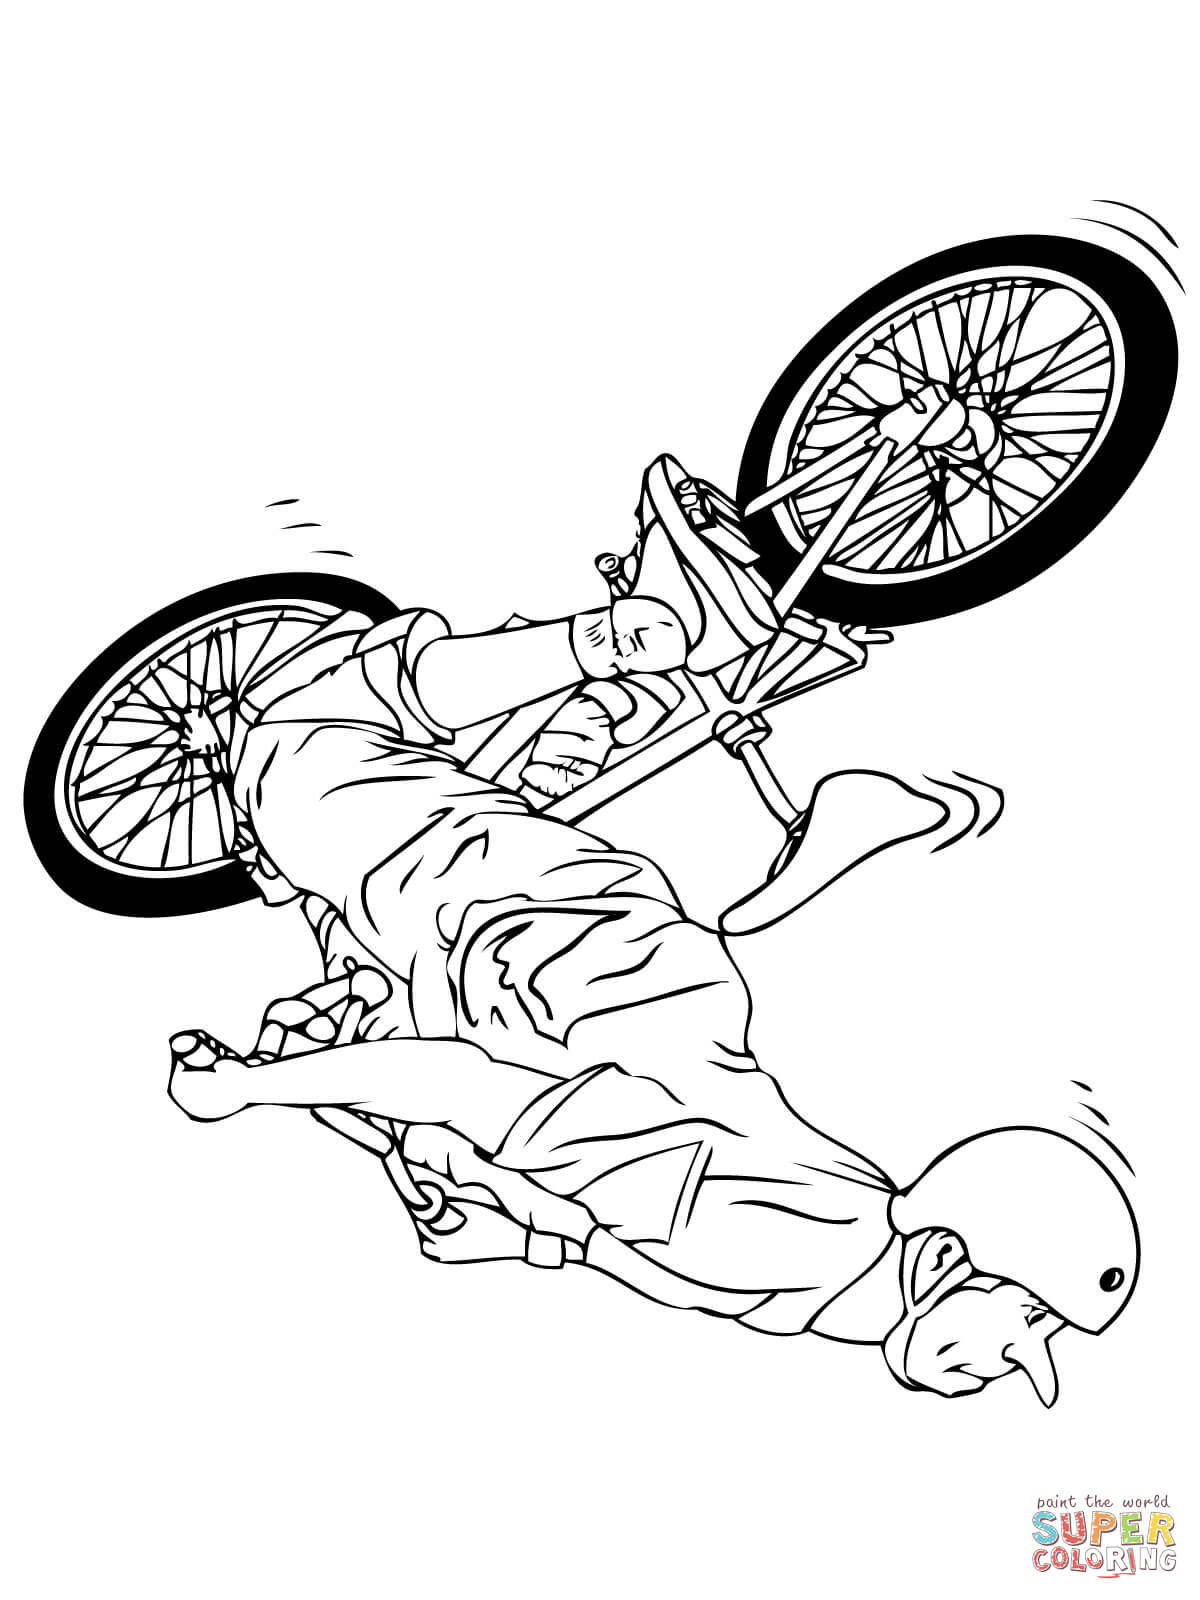 133 Dirt Bike Coloring Pages: Rev Up Your Creativity 58